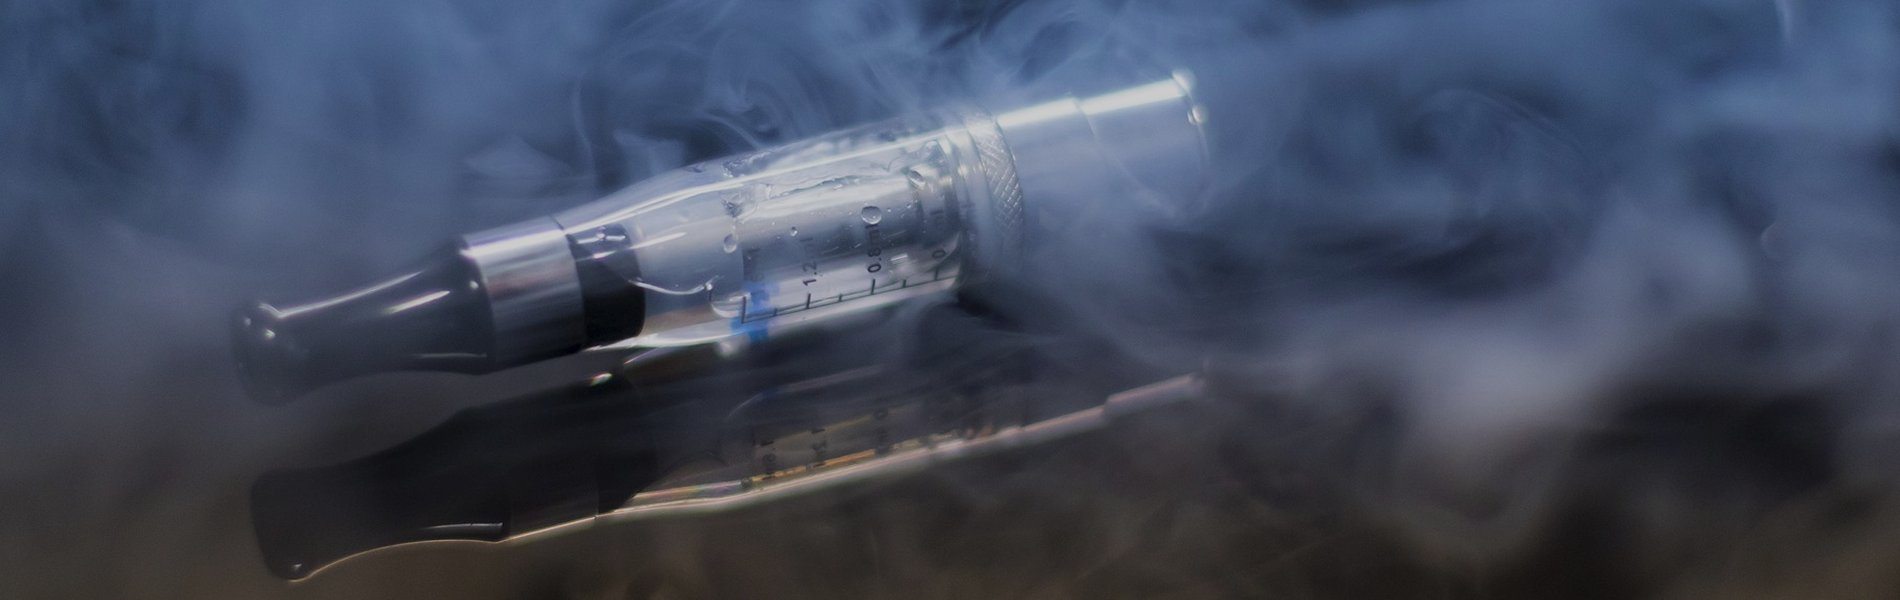 E-Cigarettes May Cause Life Changing Facial Lacerations and Poisoning